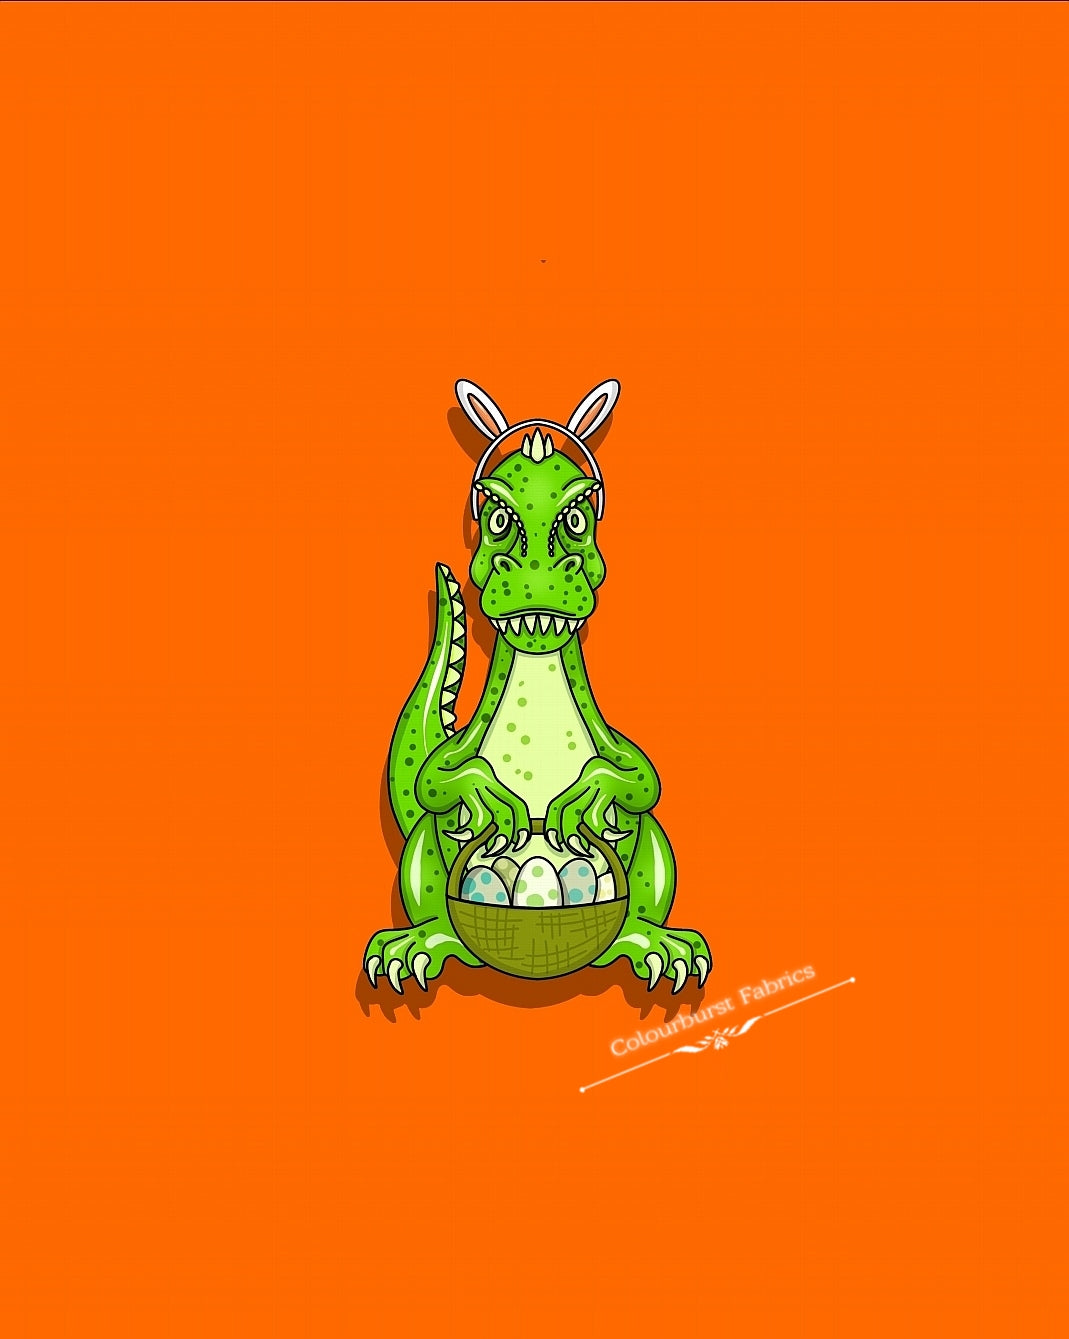 Green dinosaur bunny holding an easyer basket filled with spotted eggs and wearing easter bunny ears. On an orange background. Panels available in 3 sizes, infant, child and adult. Exclusive panel can be printed onto our 22 bases.